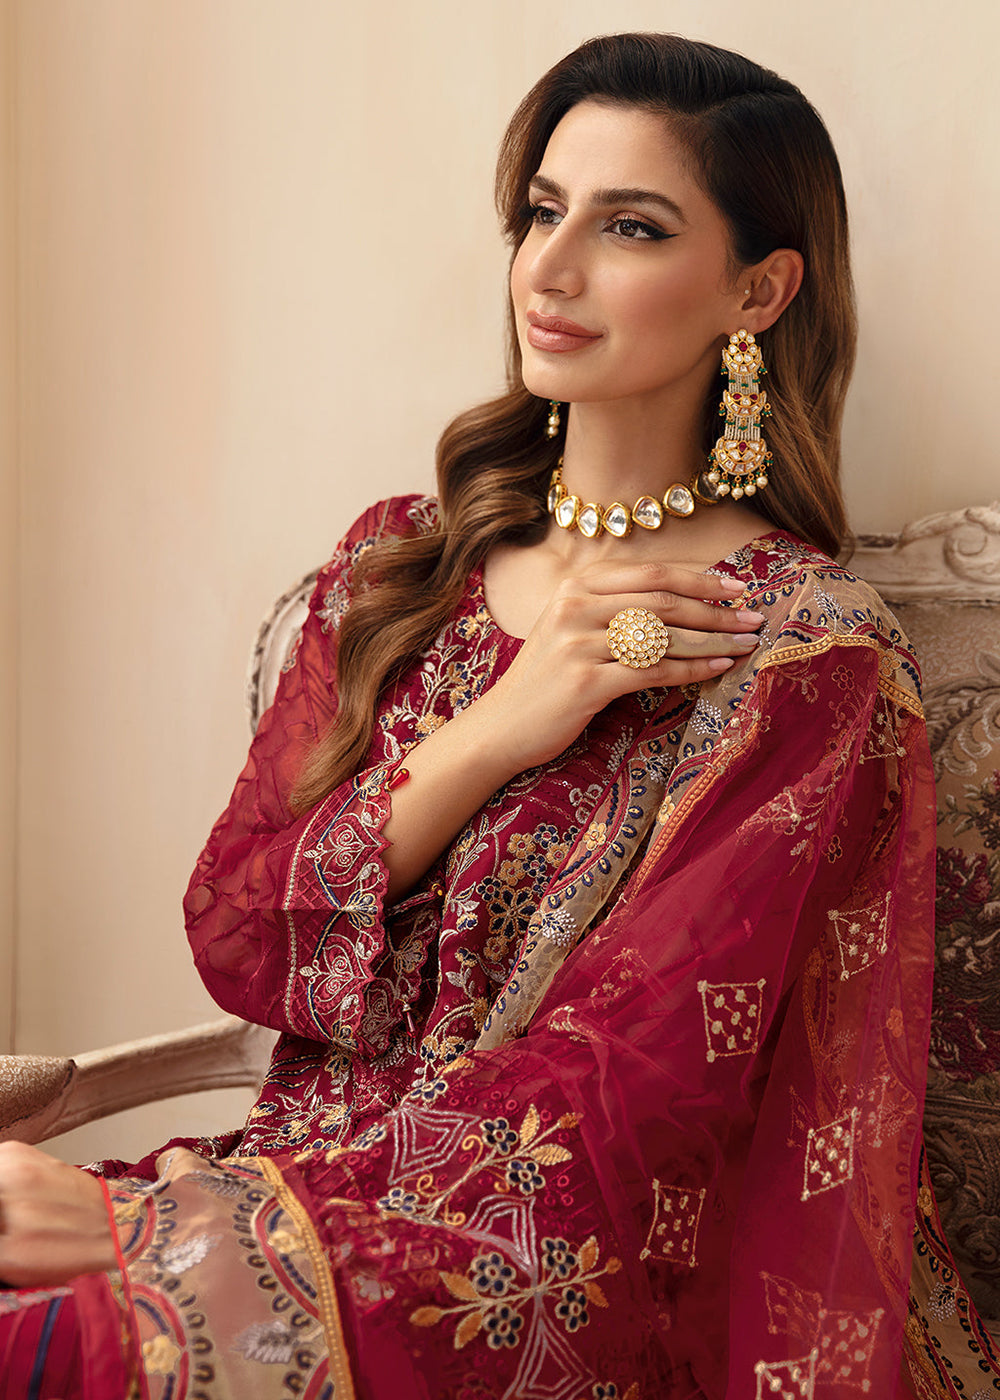 Buy Now Chevron Luxury Chiffon Collection 24 by Ramsha | A-907 Online at Empress in USA, UK, Canada, Germany, Italy, Dubai & Worldwide at Empress Clothing. 